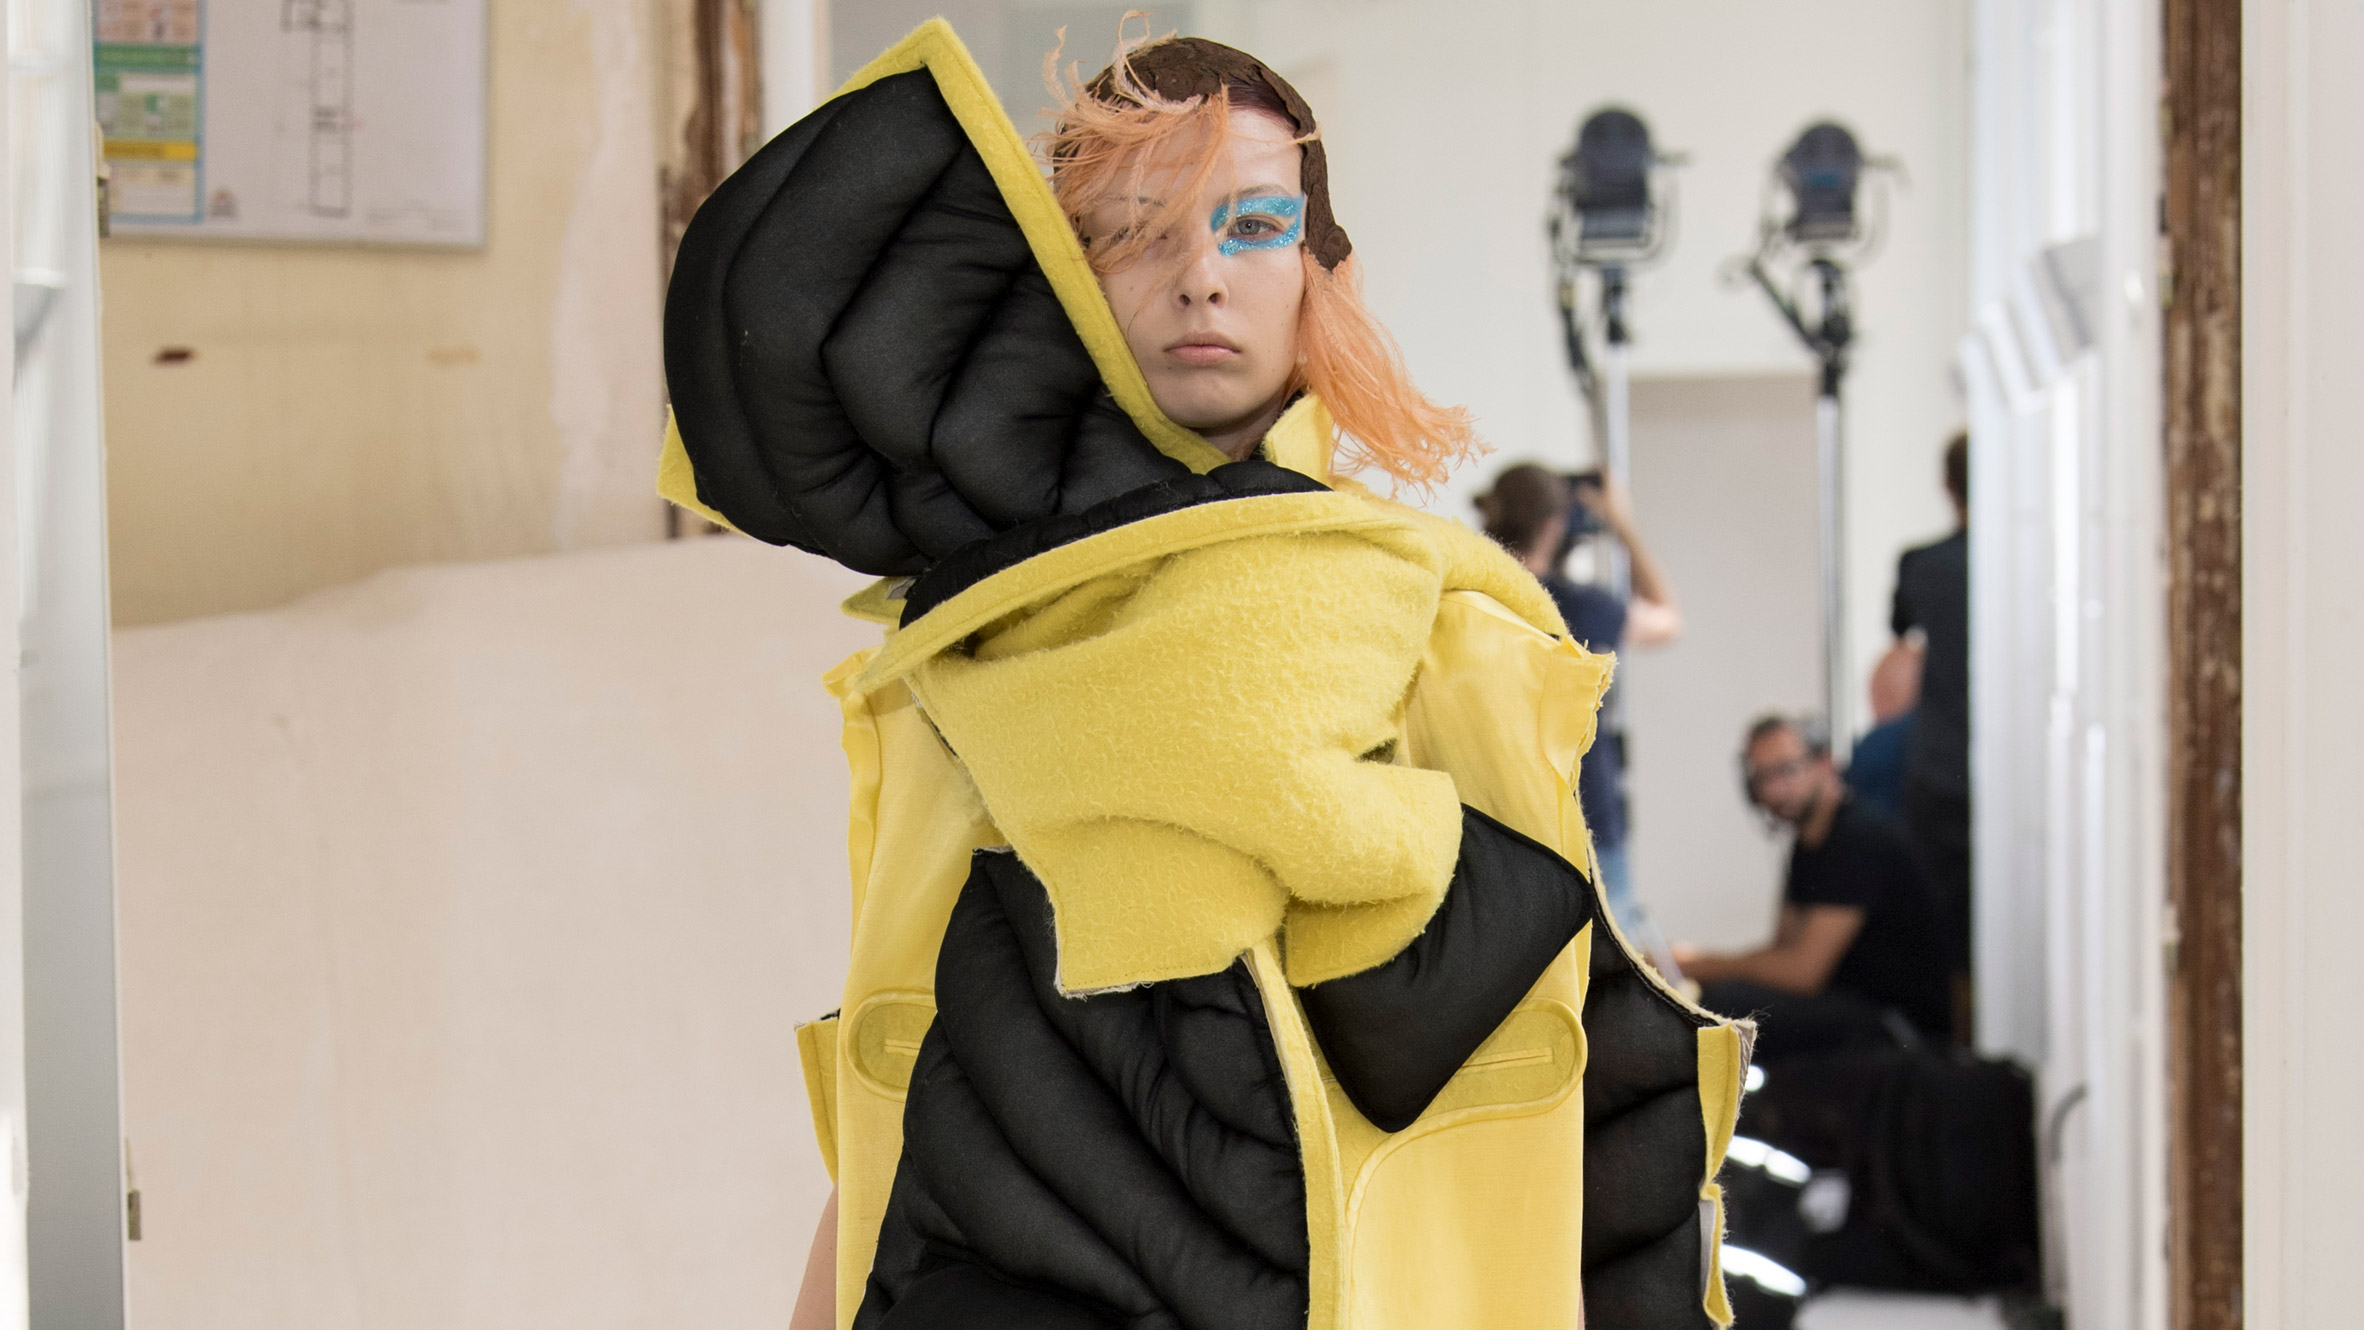 10 things we learned from John Galliano's Margiela podcast